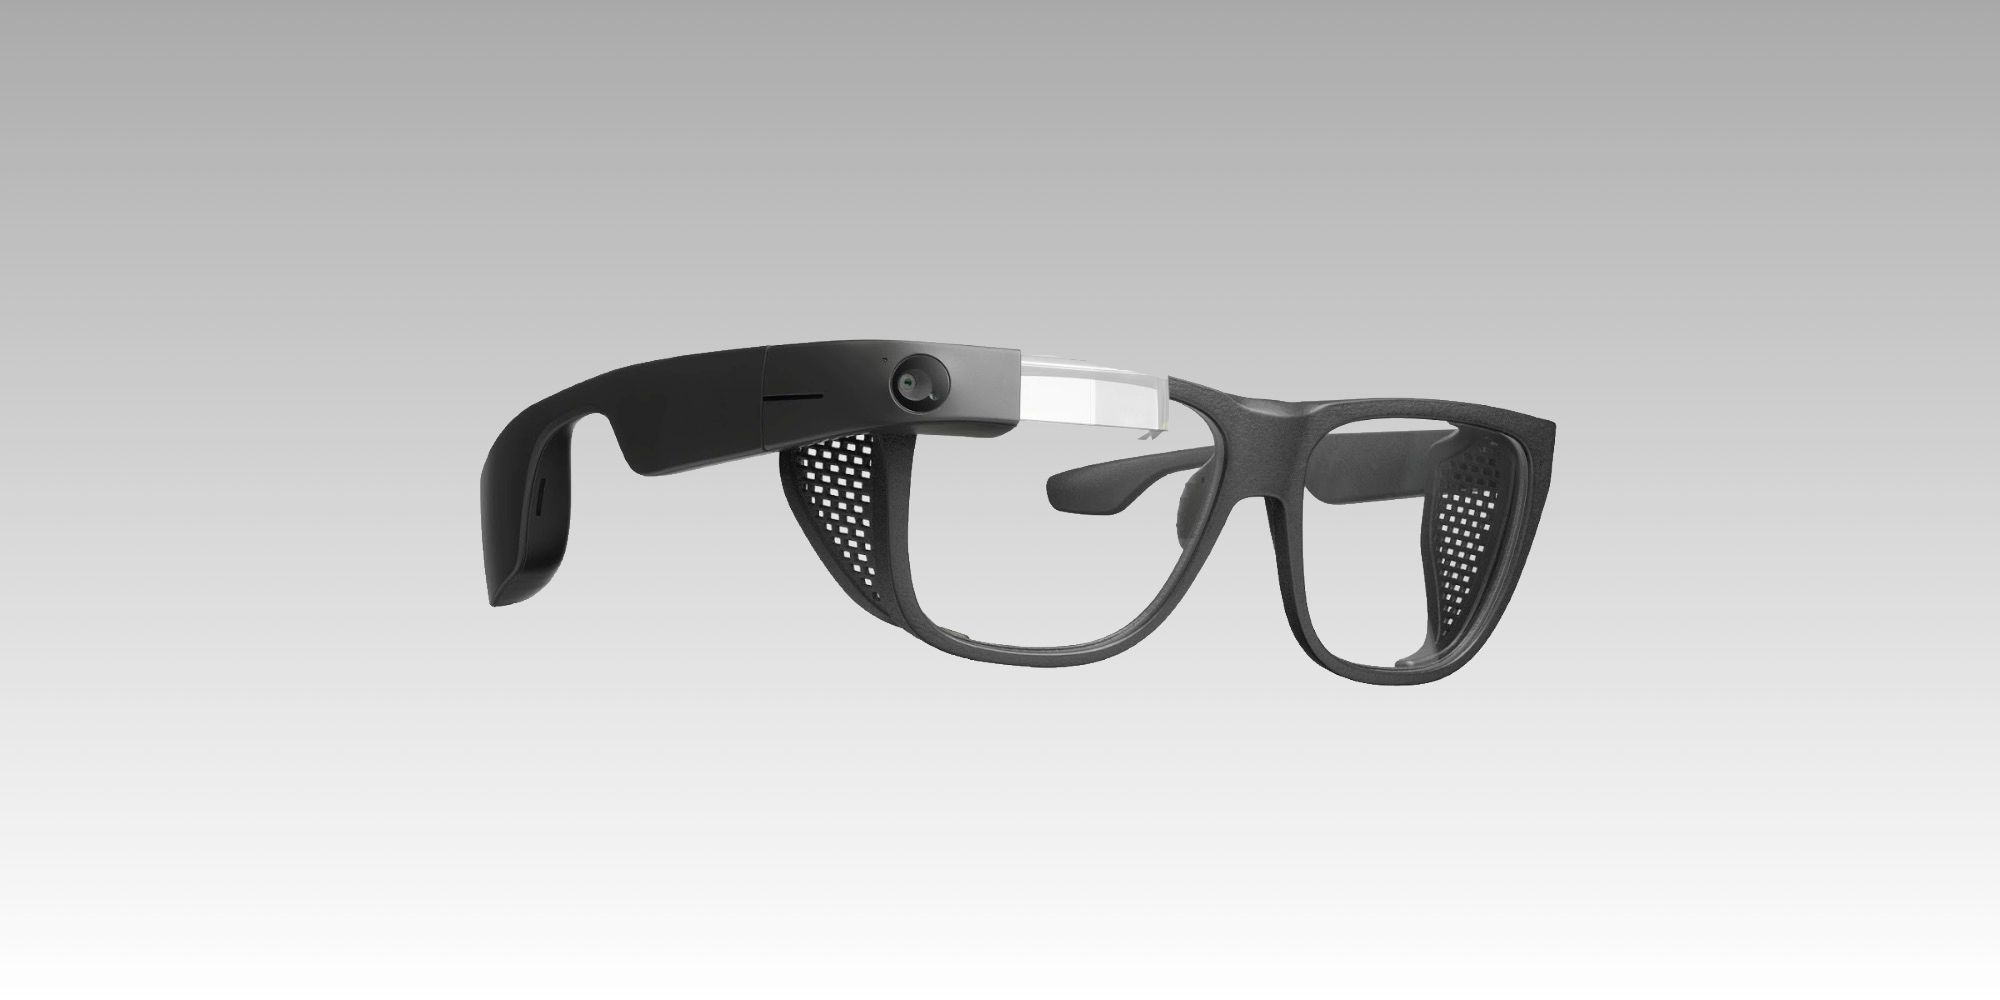 Google Glass: What Happened To The Futuristic Smart Glasses?